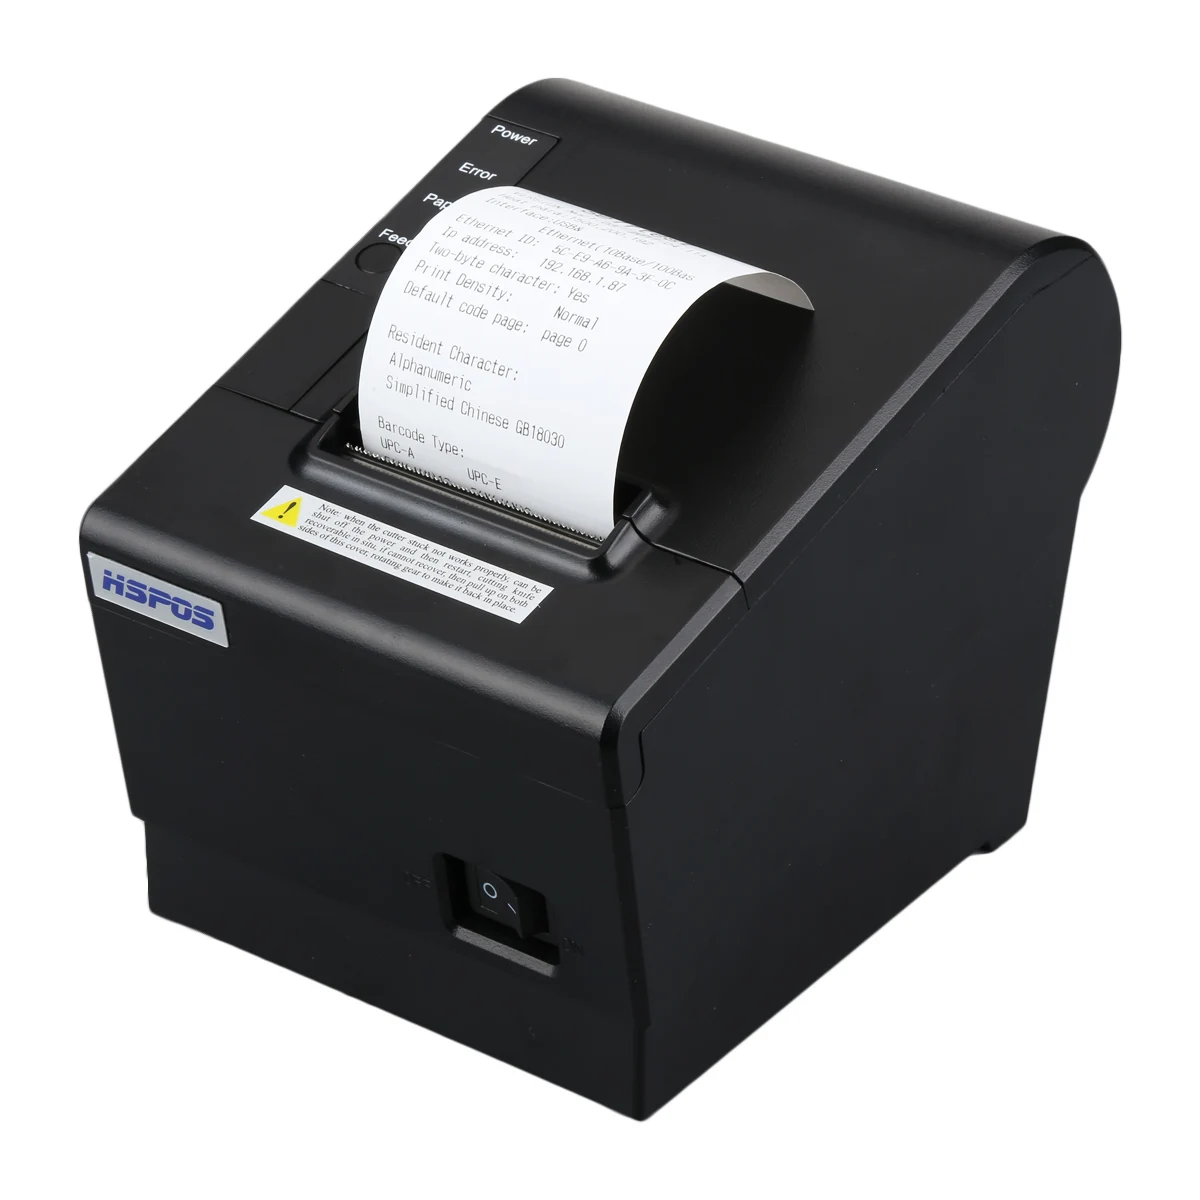 

HS-C58CULW 58MM Thermal Receipt Printer USB lan gprs with cutter POS systems Support Windows